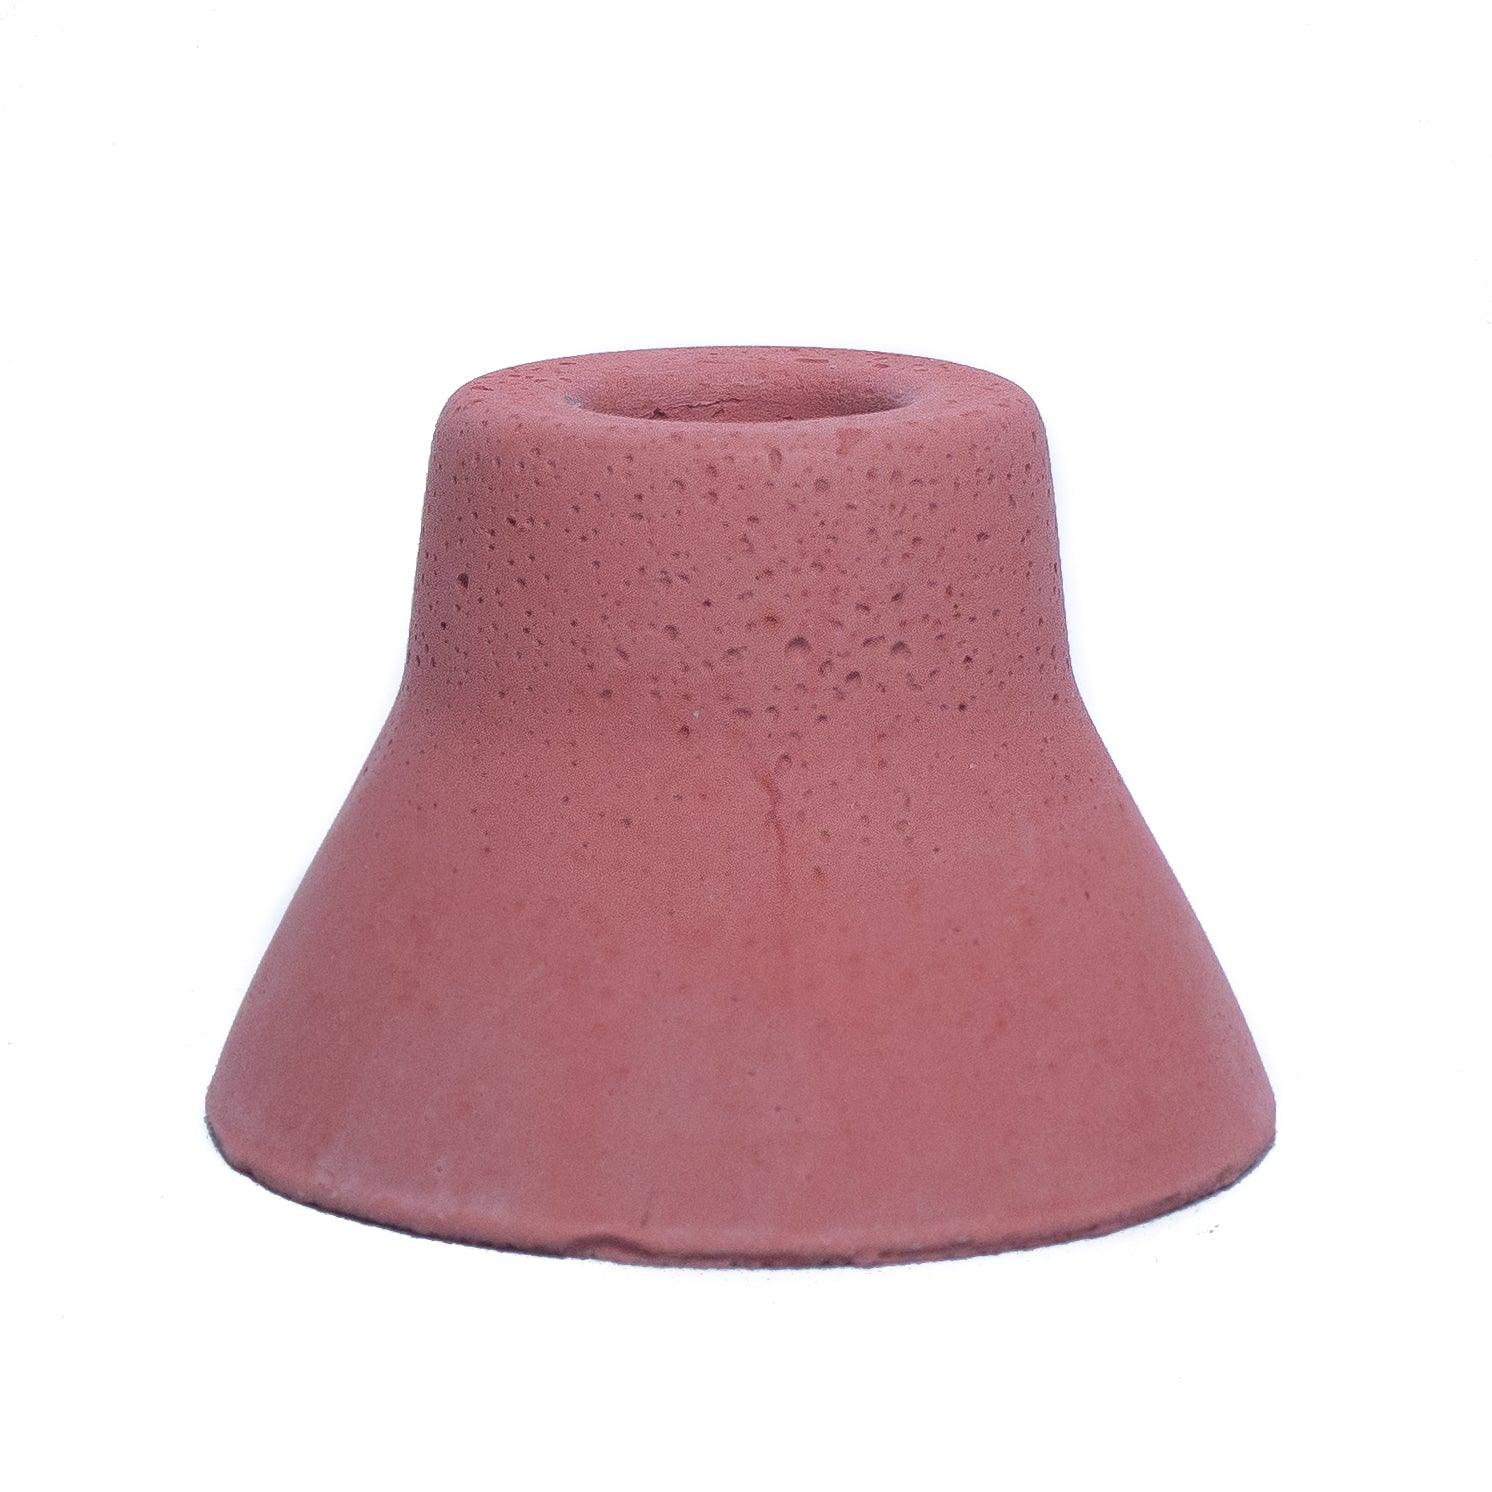 Terracotta concrete taper candle holder. 3" wide at the base, 2" high. Holder narrows toward the top to fit Bluecorn Beeswax's standard taper holder.